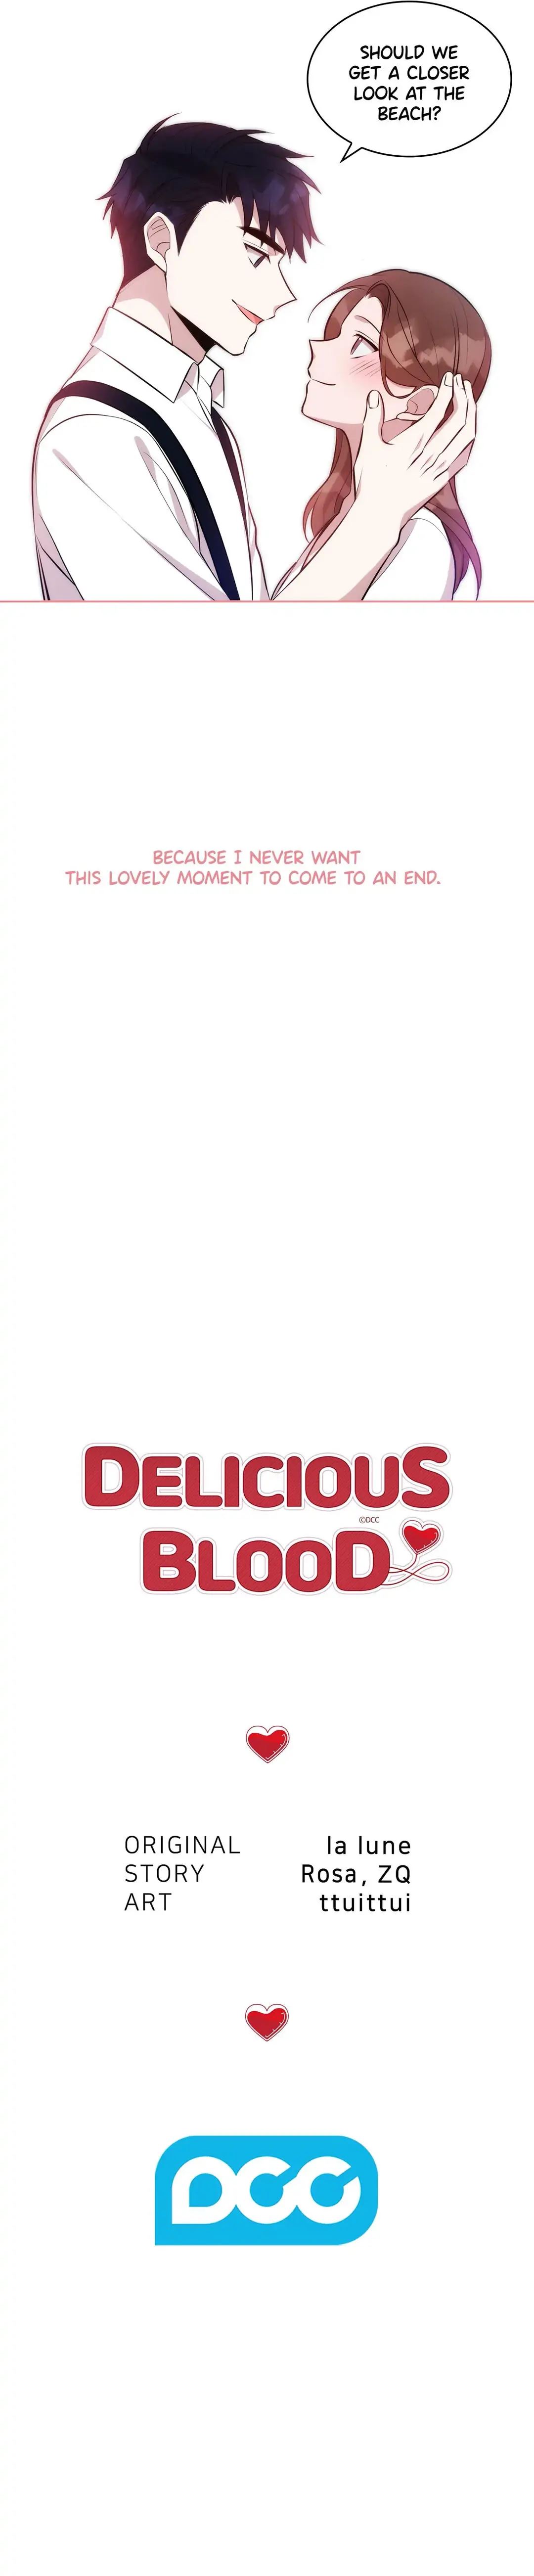 Delicious Blood NEW image